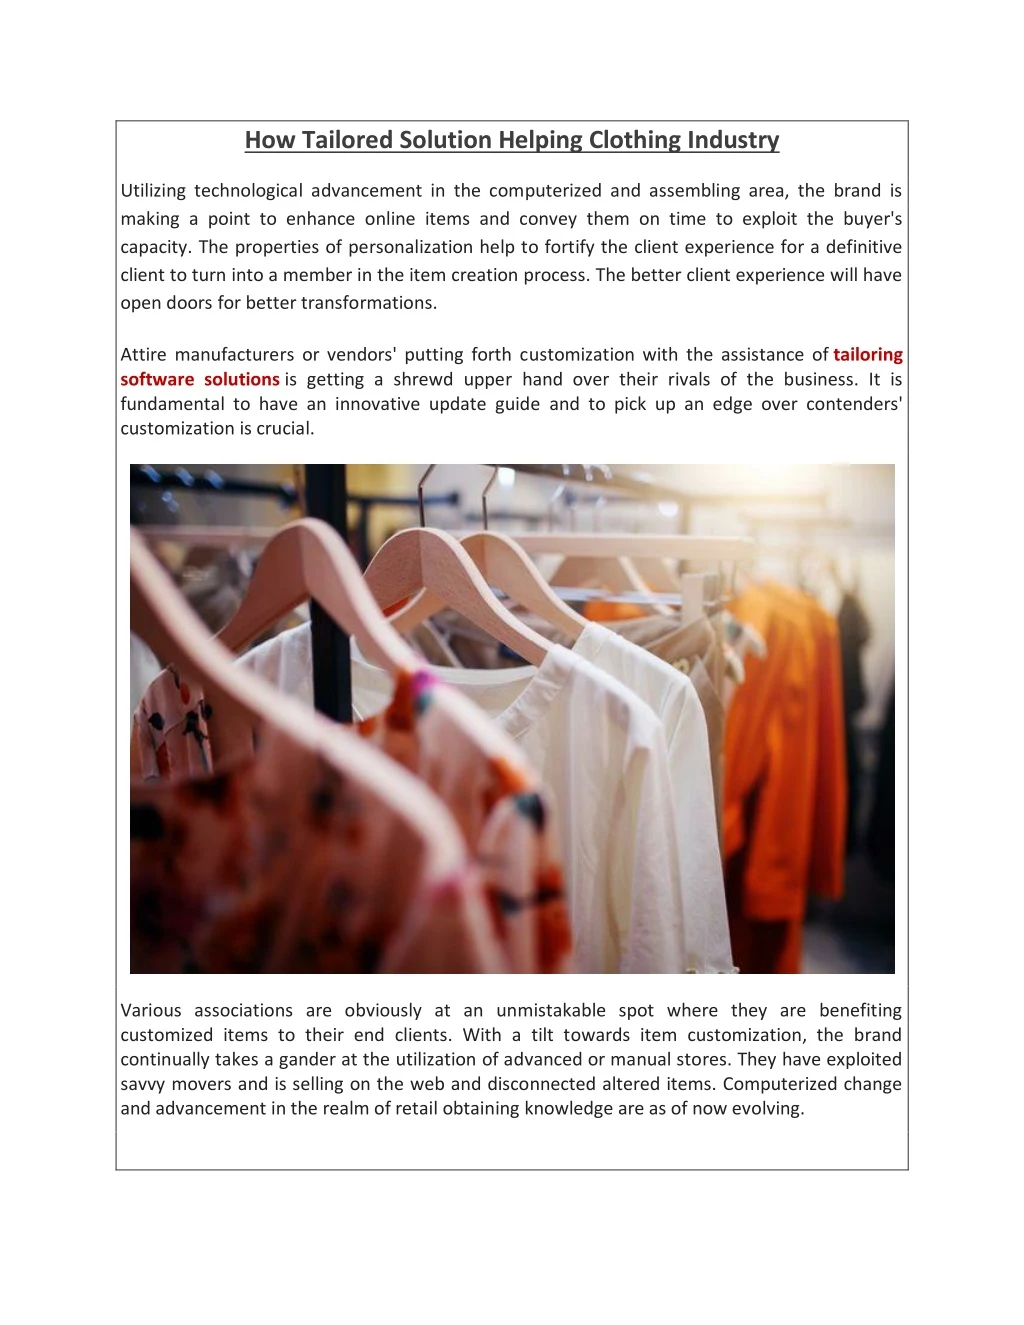 how tailored solution helping clothing industry